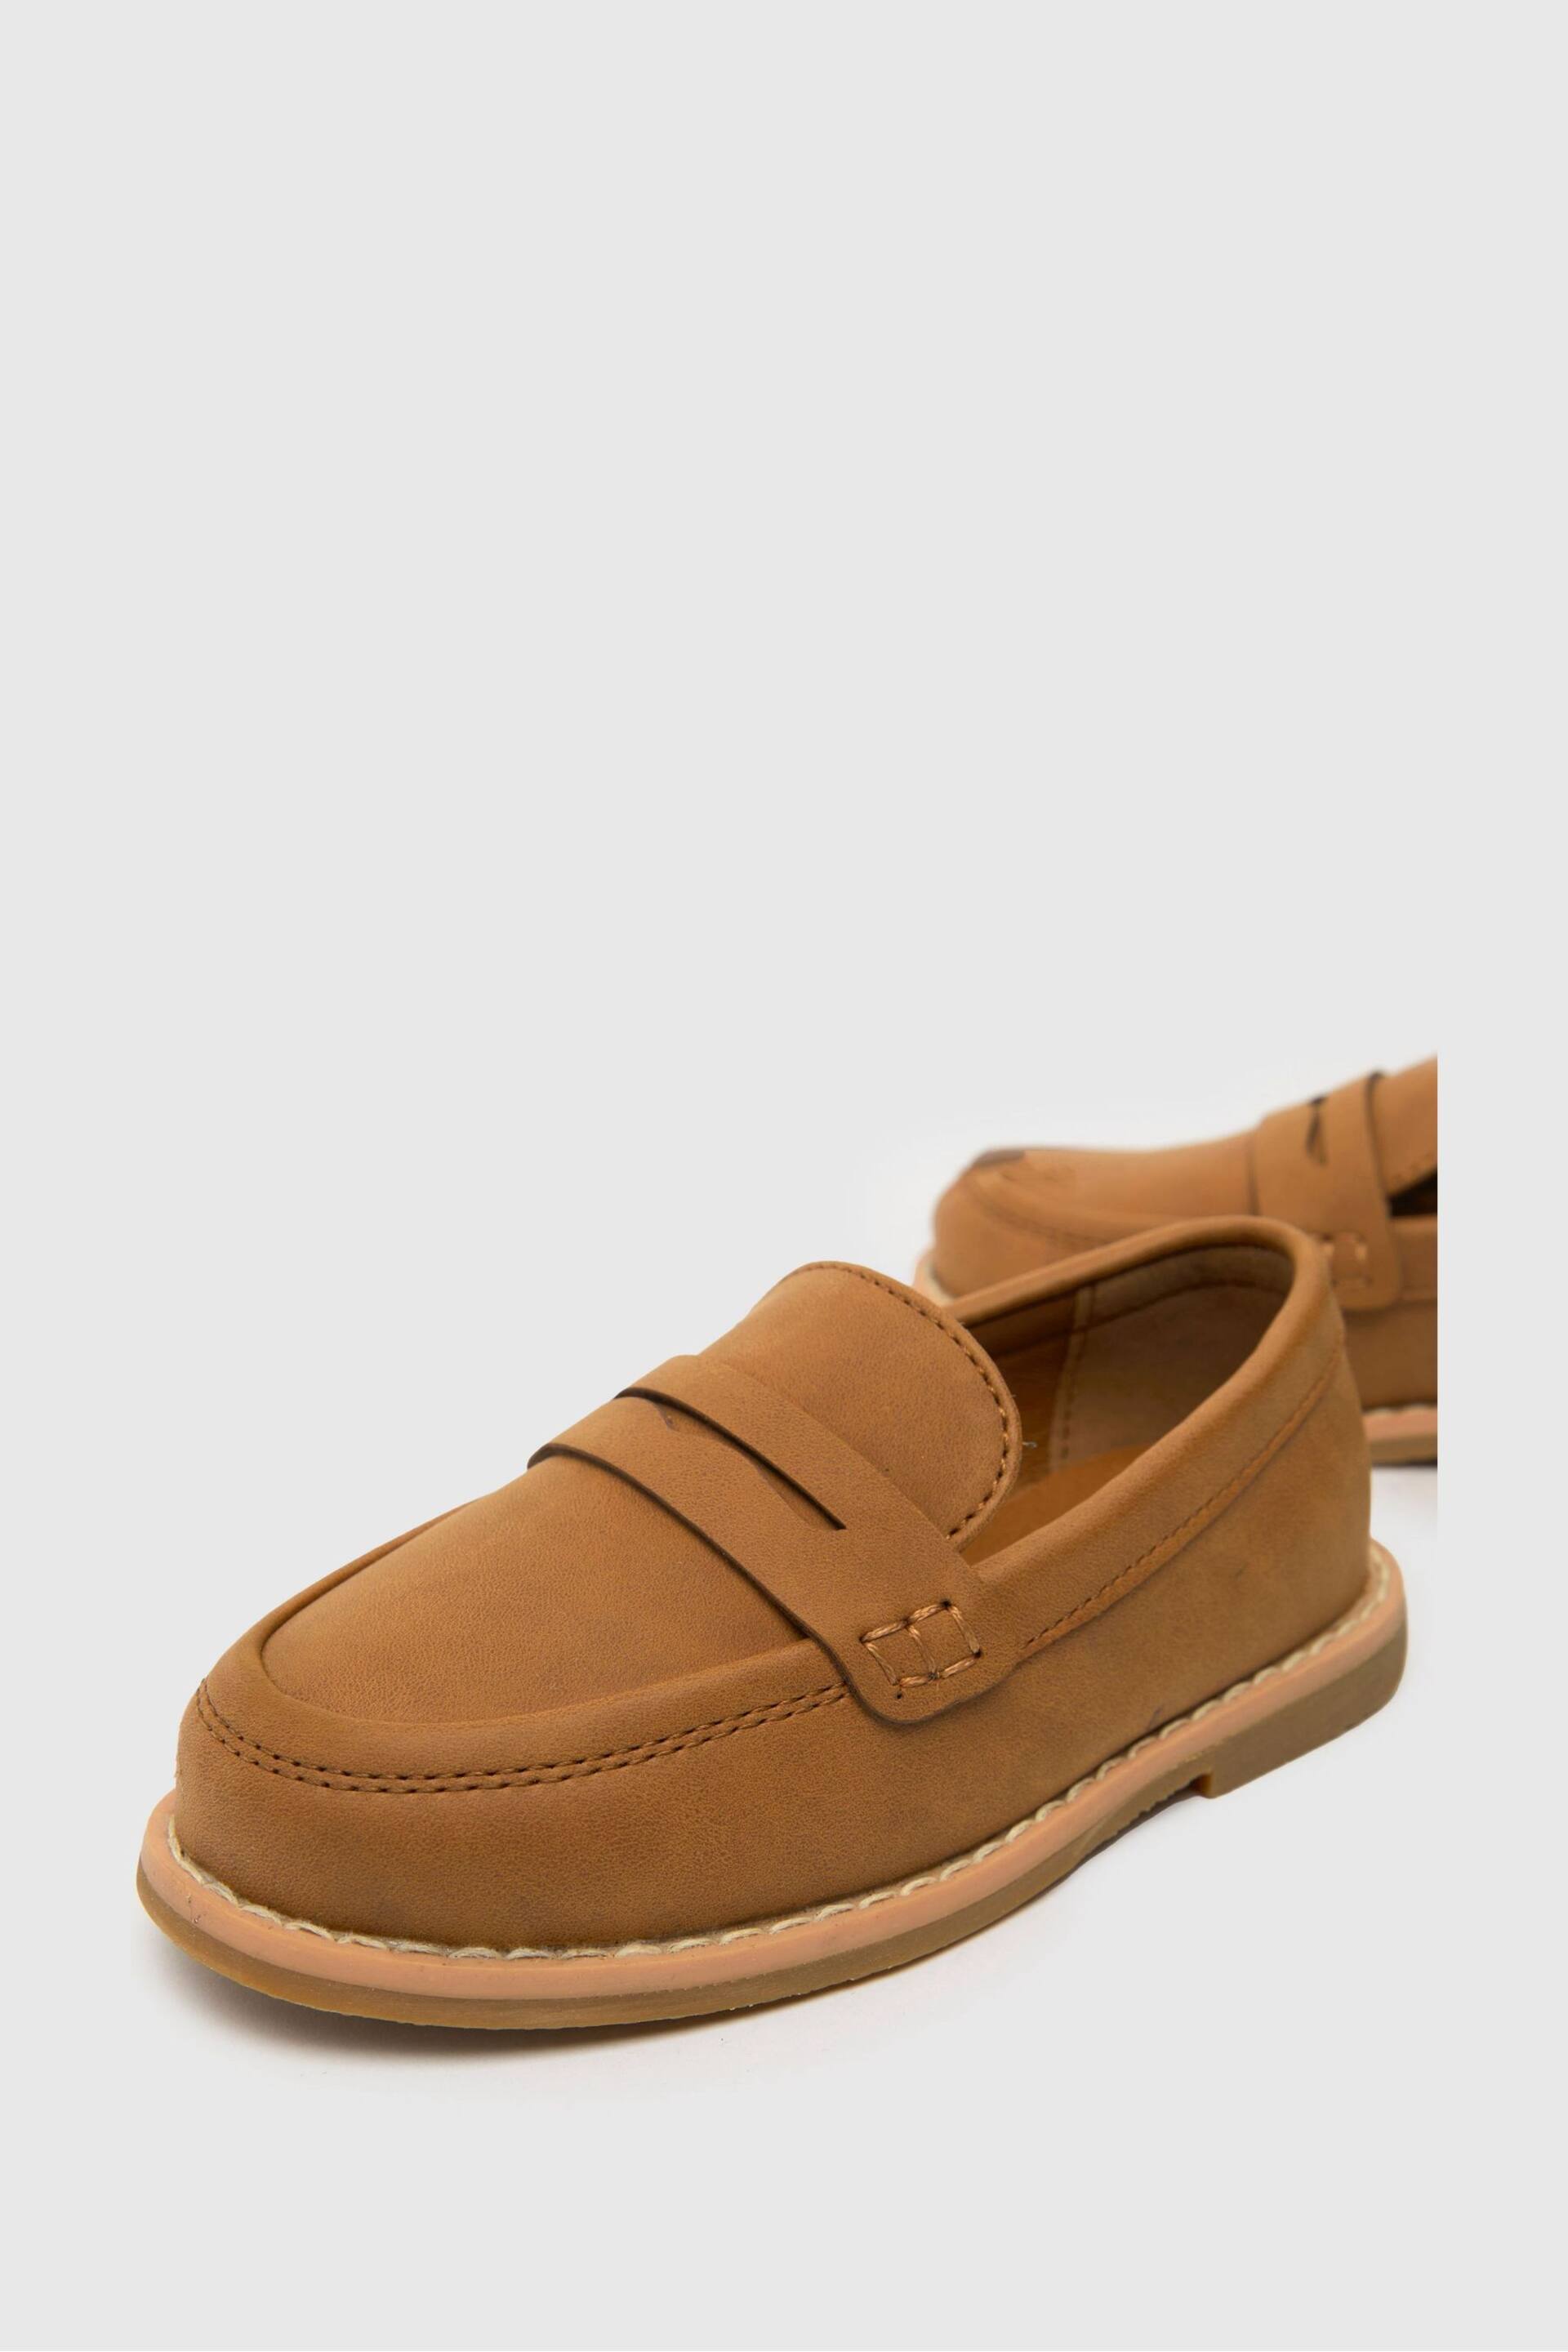 Schuh Brown Limit Loafers - Image 3 of 4